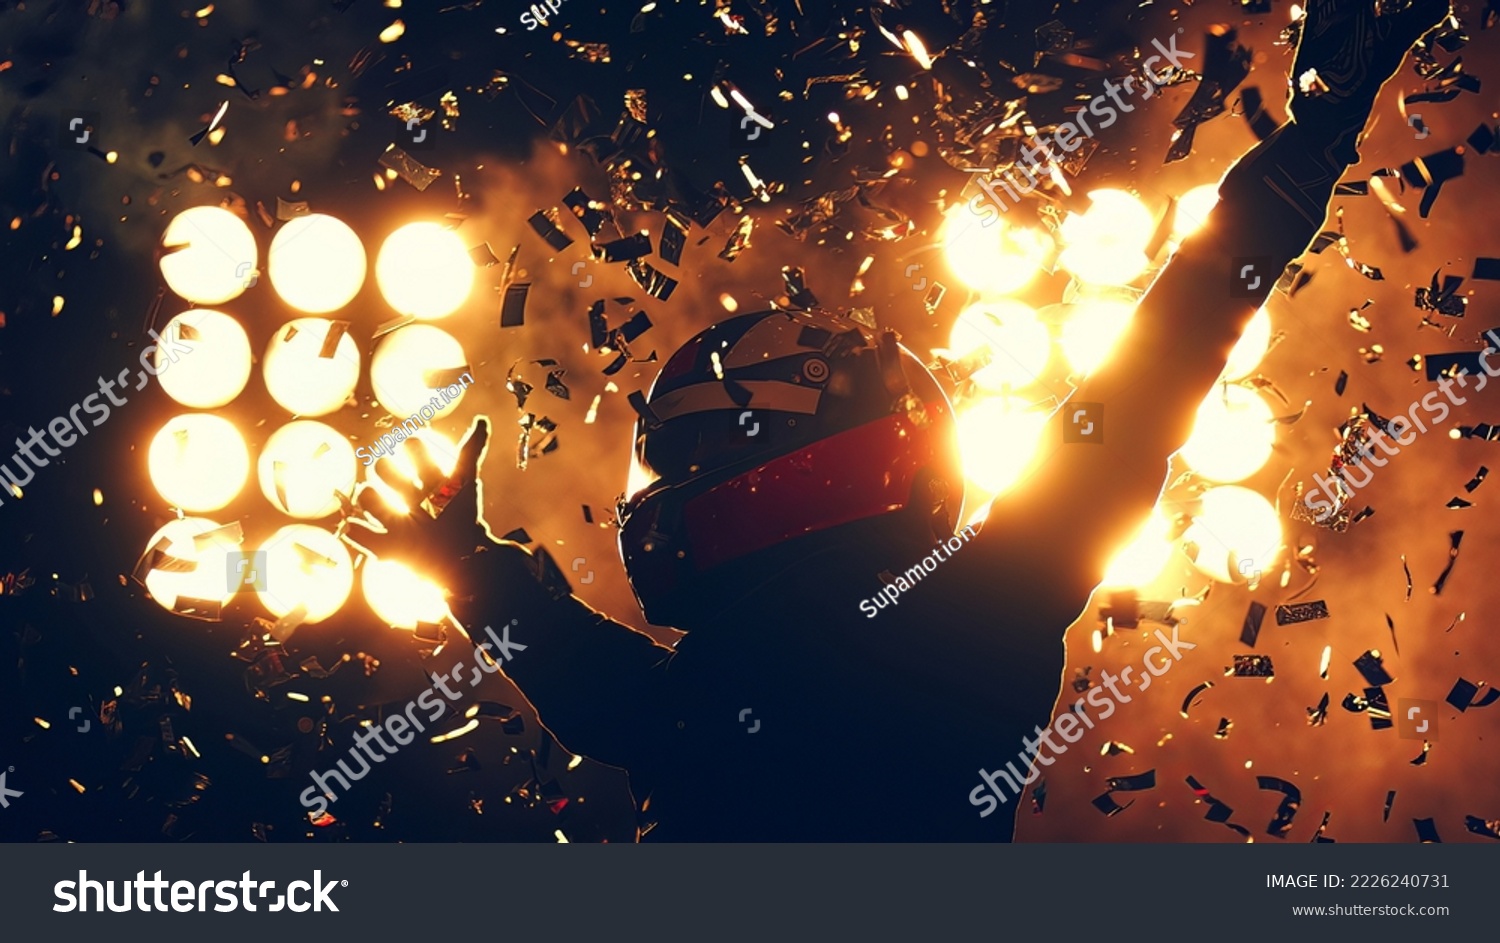 Silhouette of race car driver celebrating the win in a race against bright stadium lights. 100 FPS slow motion shot #2226240731